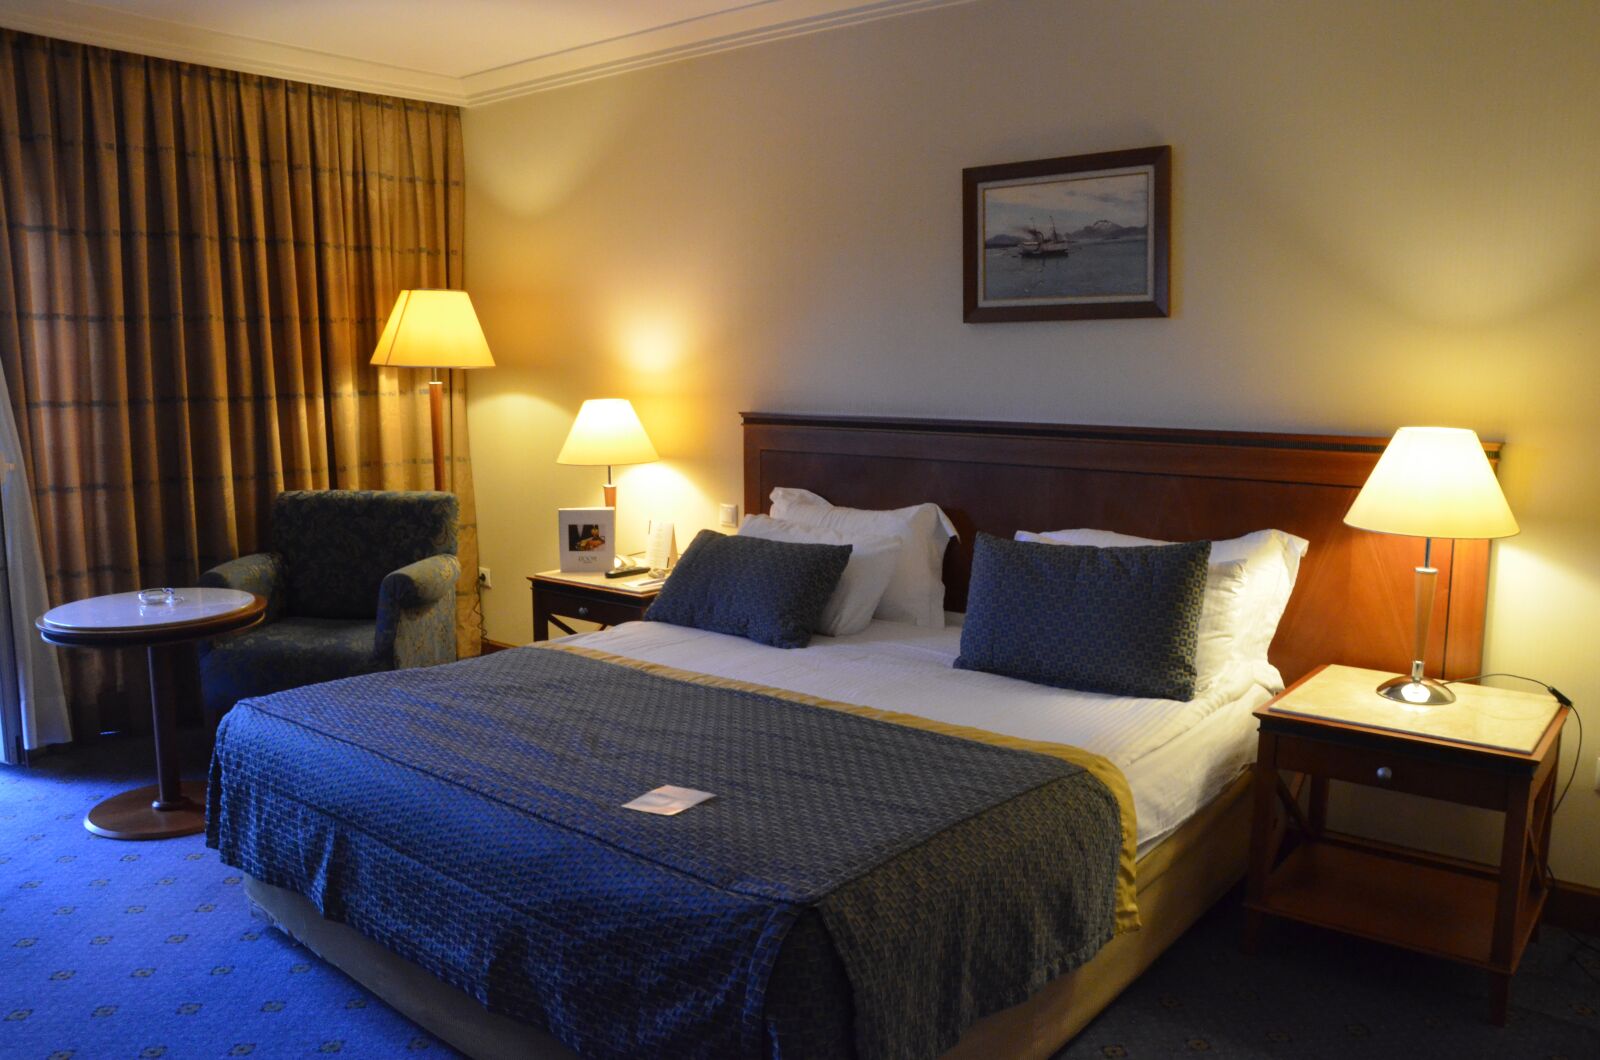 Nikon D7000 sample photo. Bed, hotels, hotel rooms photography